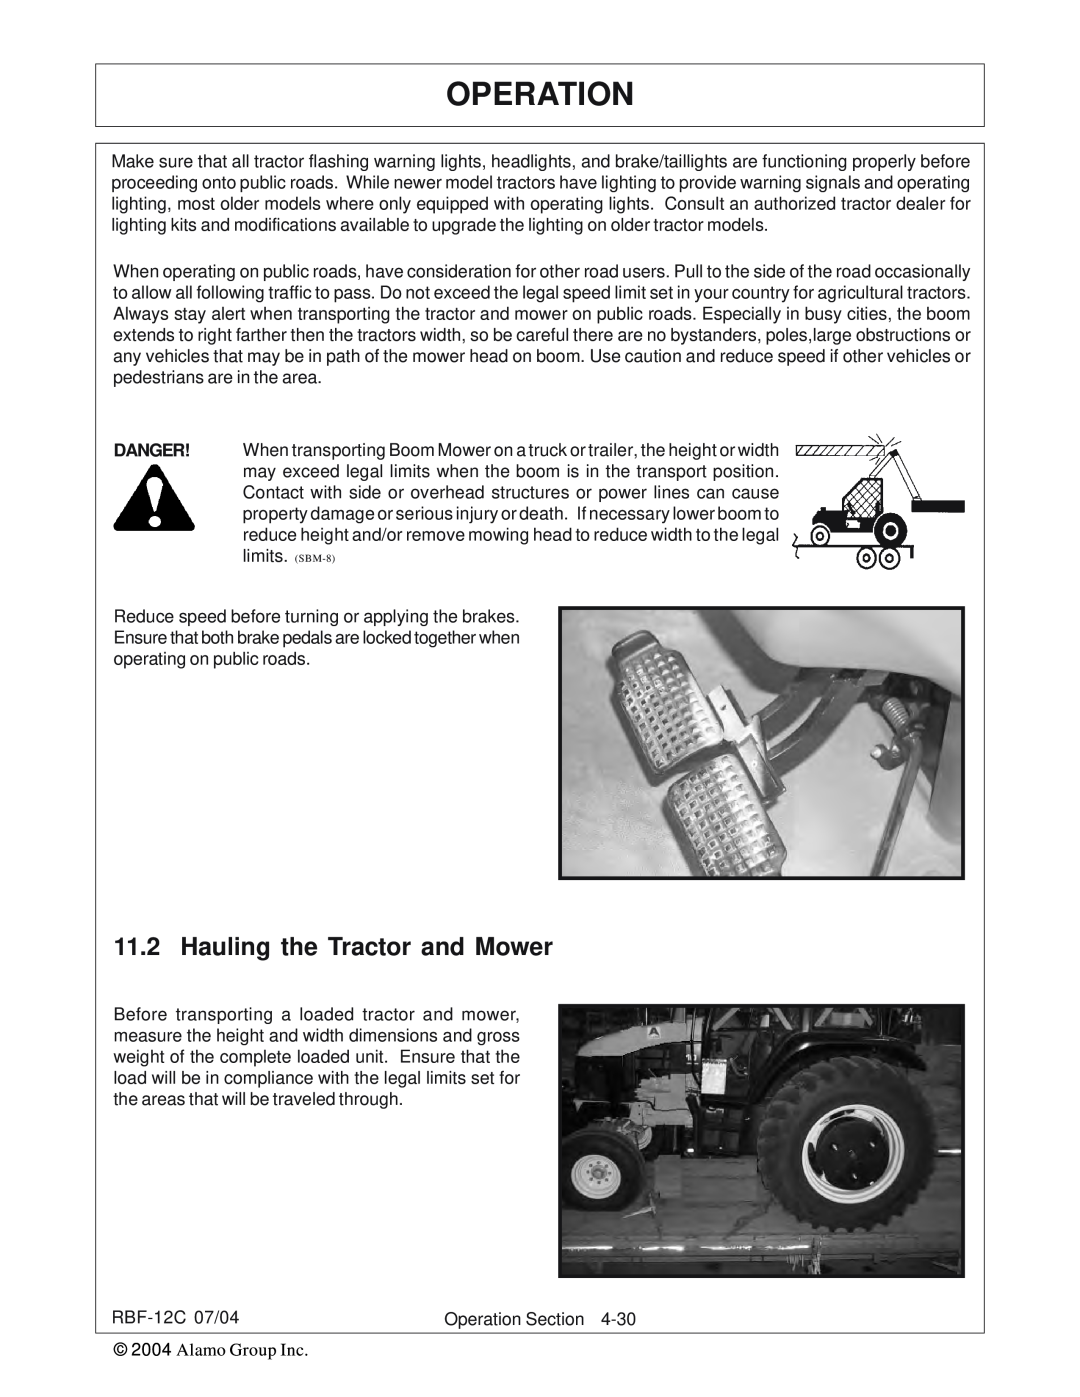 Tiger Products Co., Ltd RBF-12C manual Operation, Hauling the Tractor and Mower 